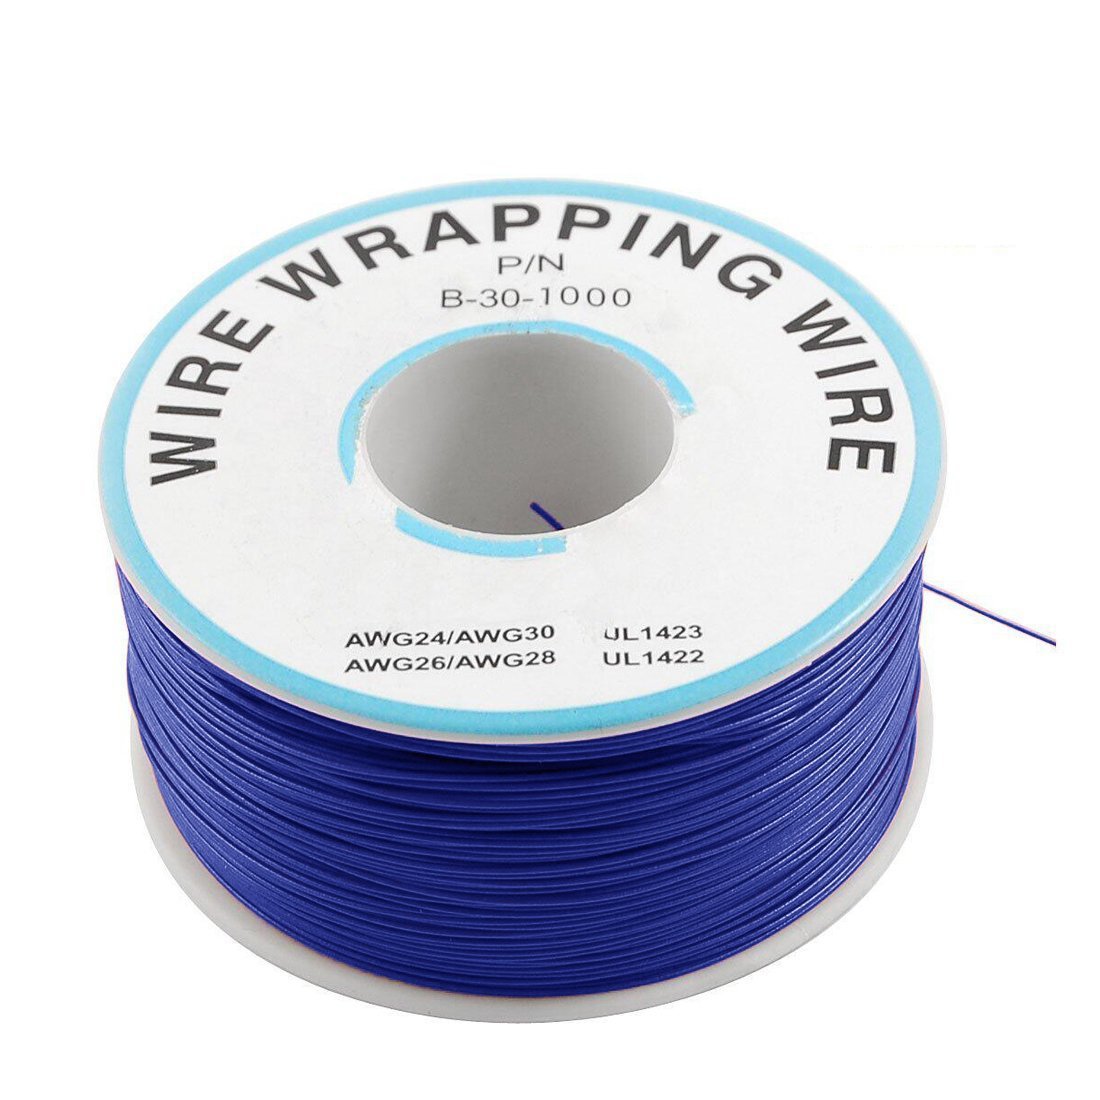 230M Pn B-30-1000 Insulated Pvc Coated 30Awg Wire Wrapping Wire-Blue